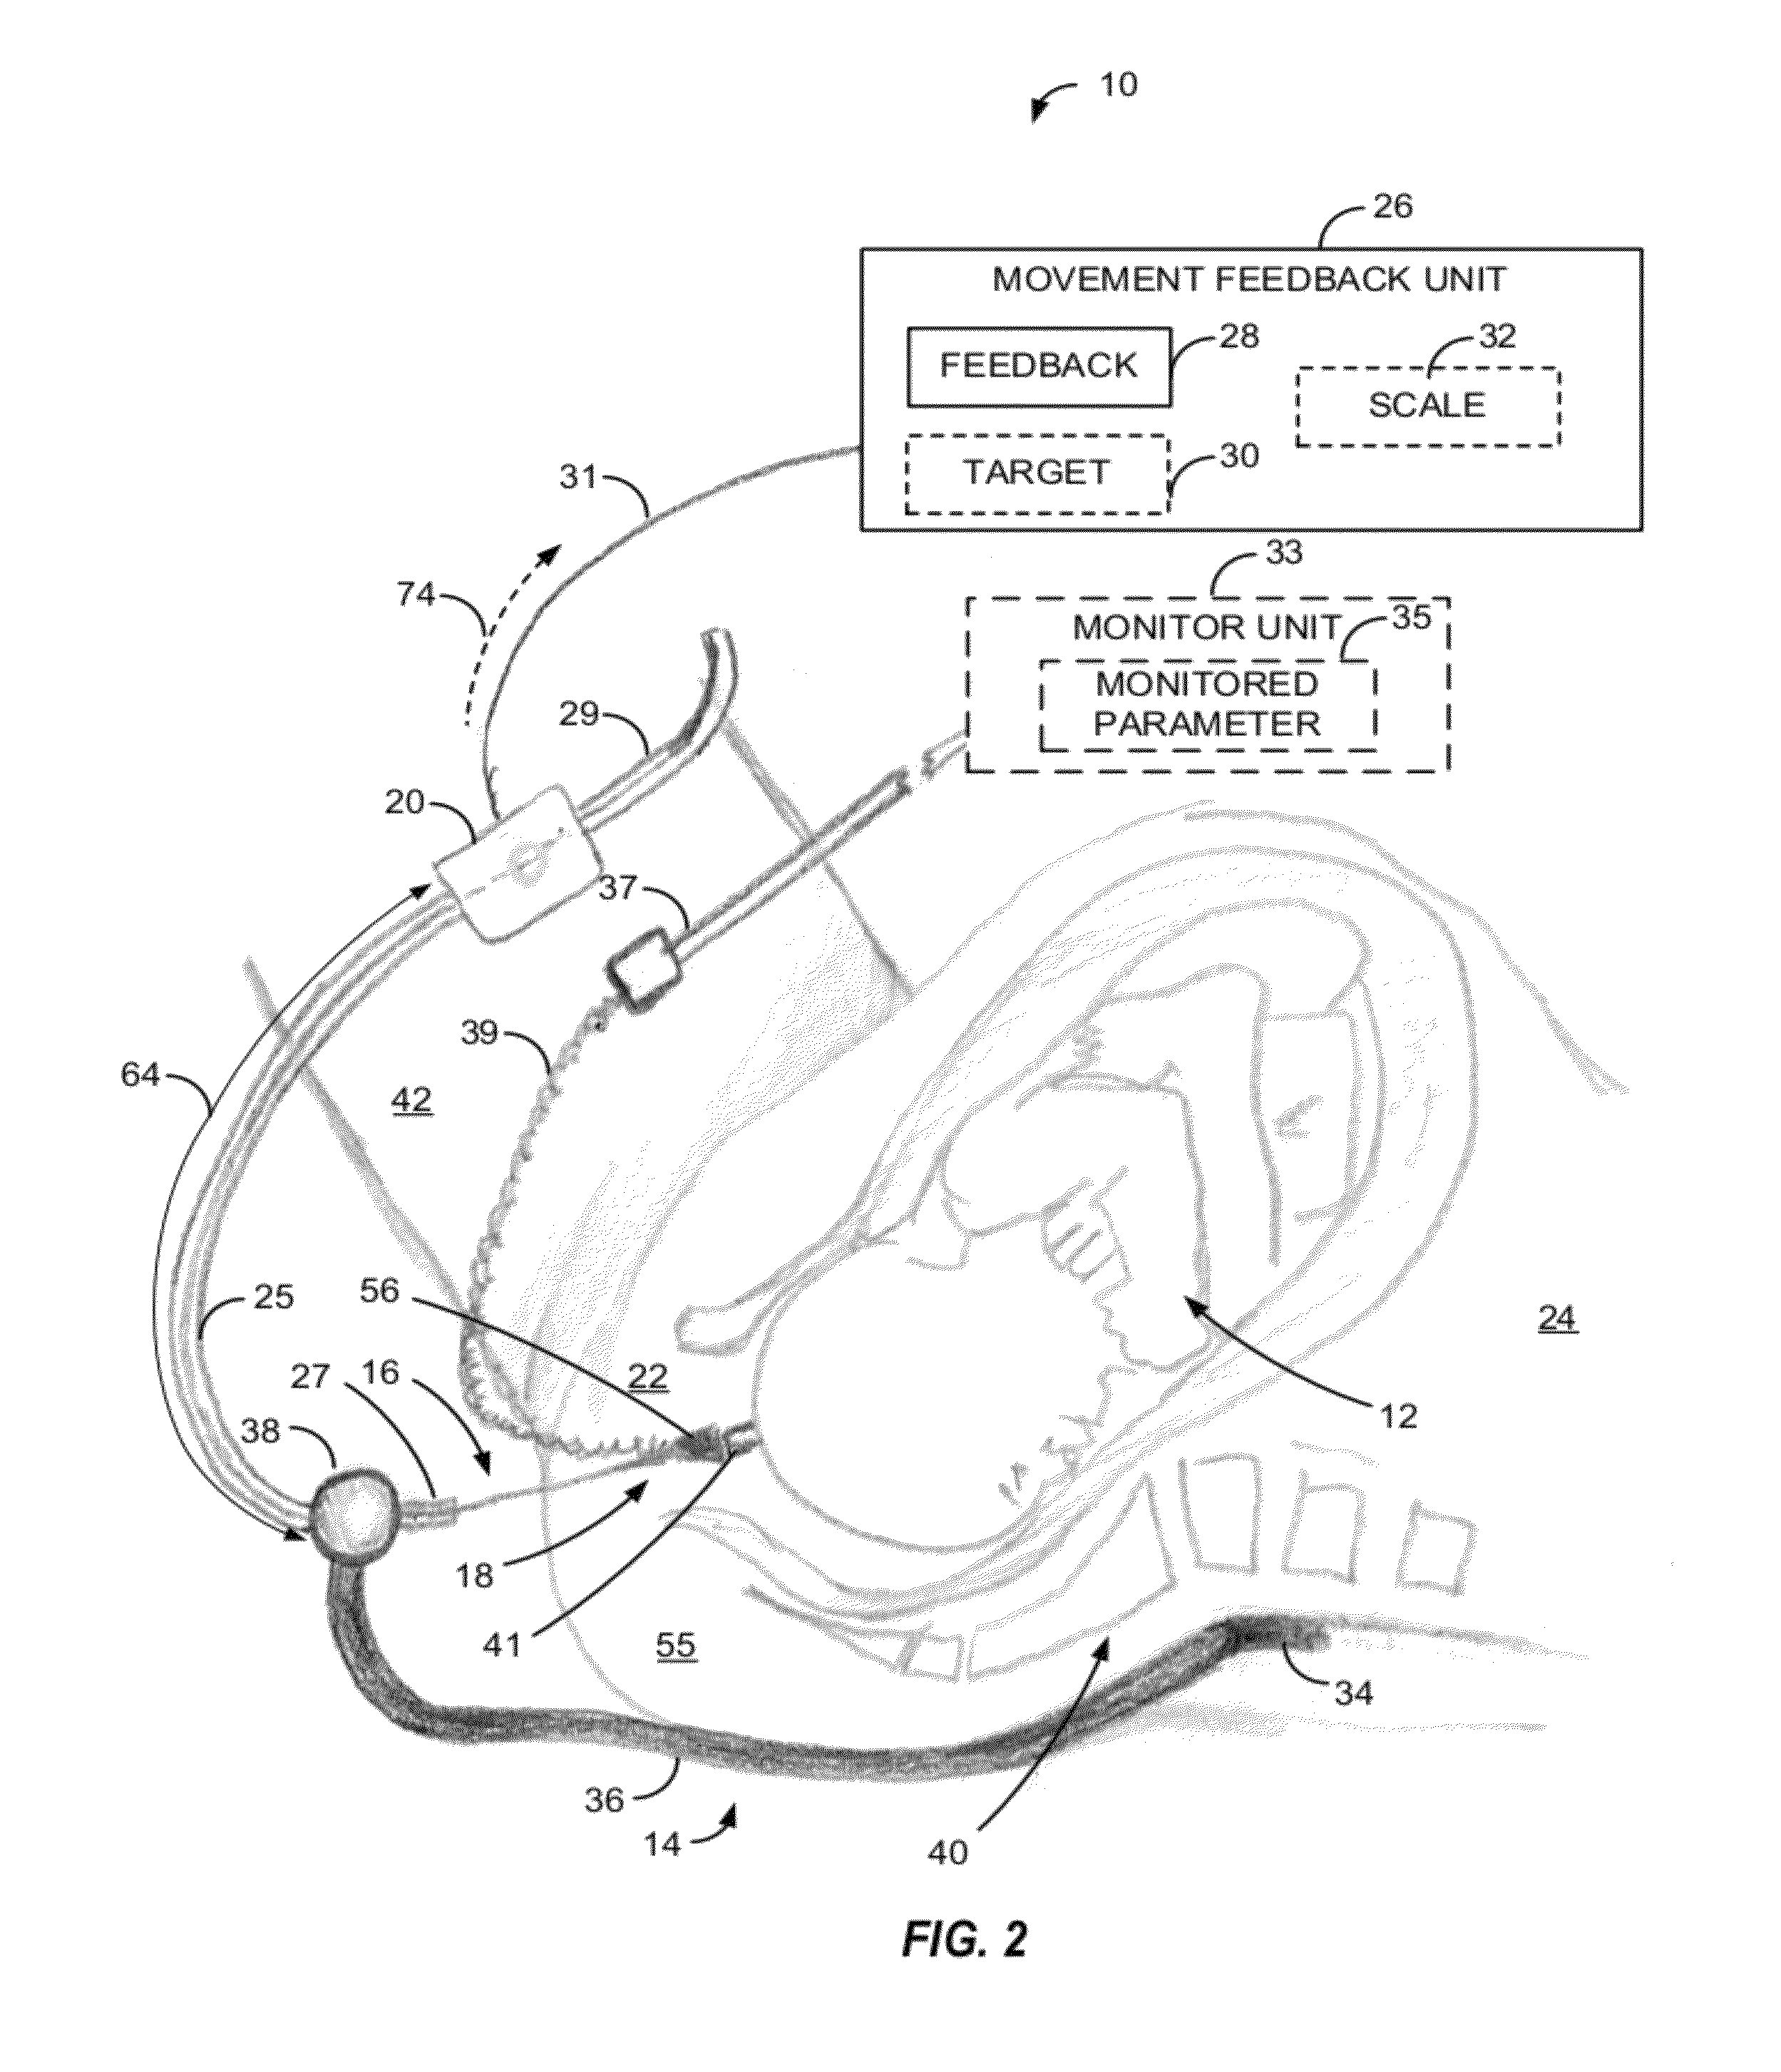 Apparatus and method of detecting movement of objects within the abdominal and/or pelvic region